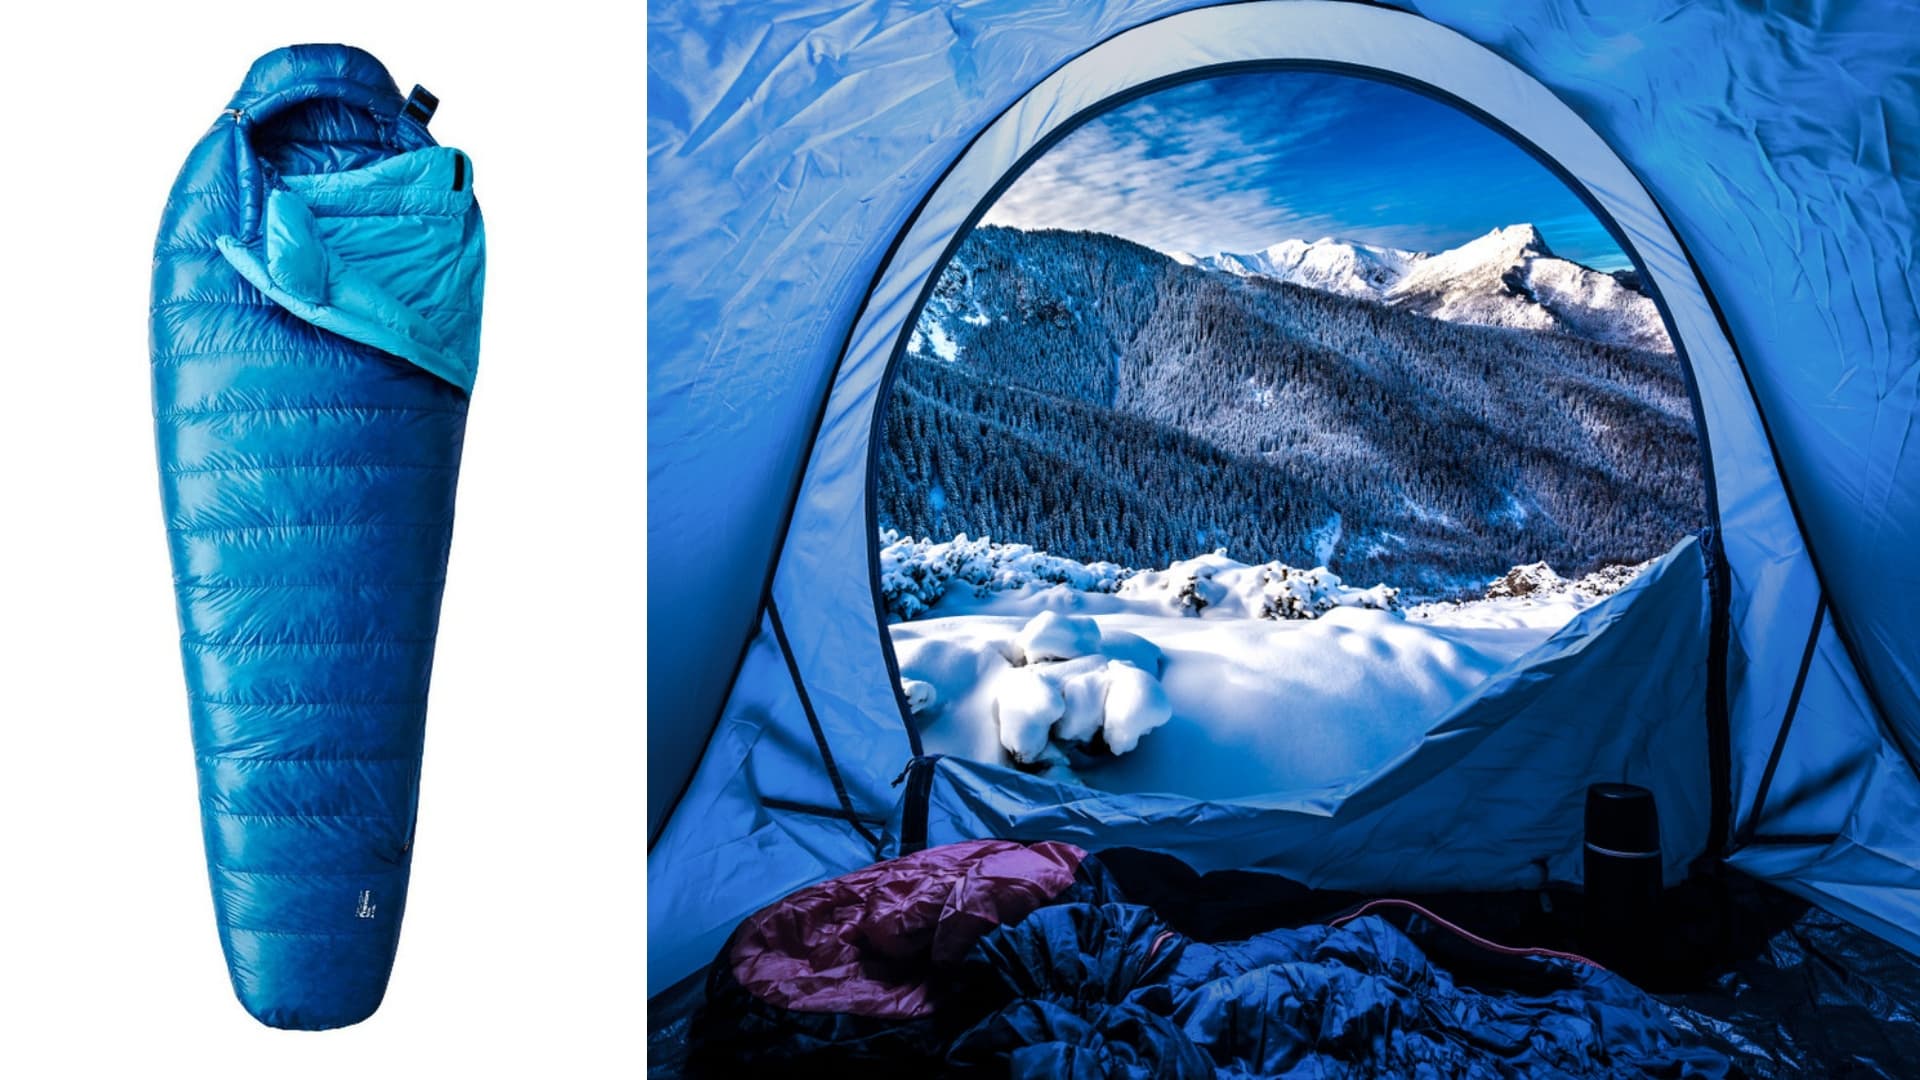 (left) blue down sleeping bag (right) blue tent filled with winter camping gear and open to snowy mountain landscape